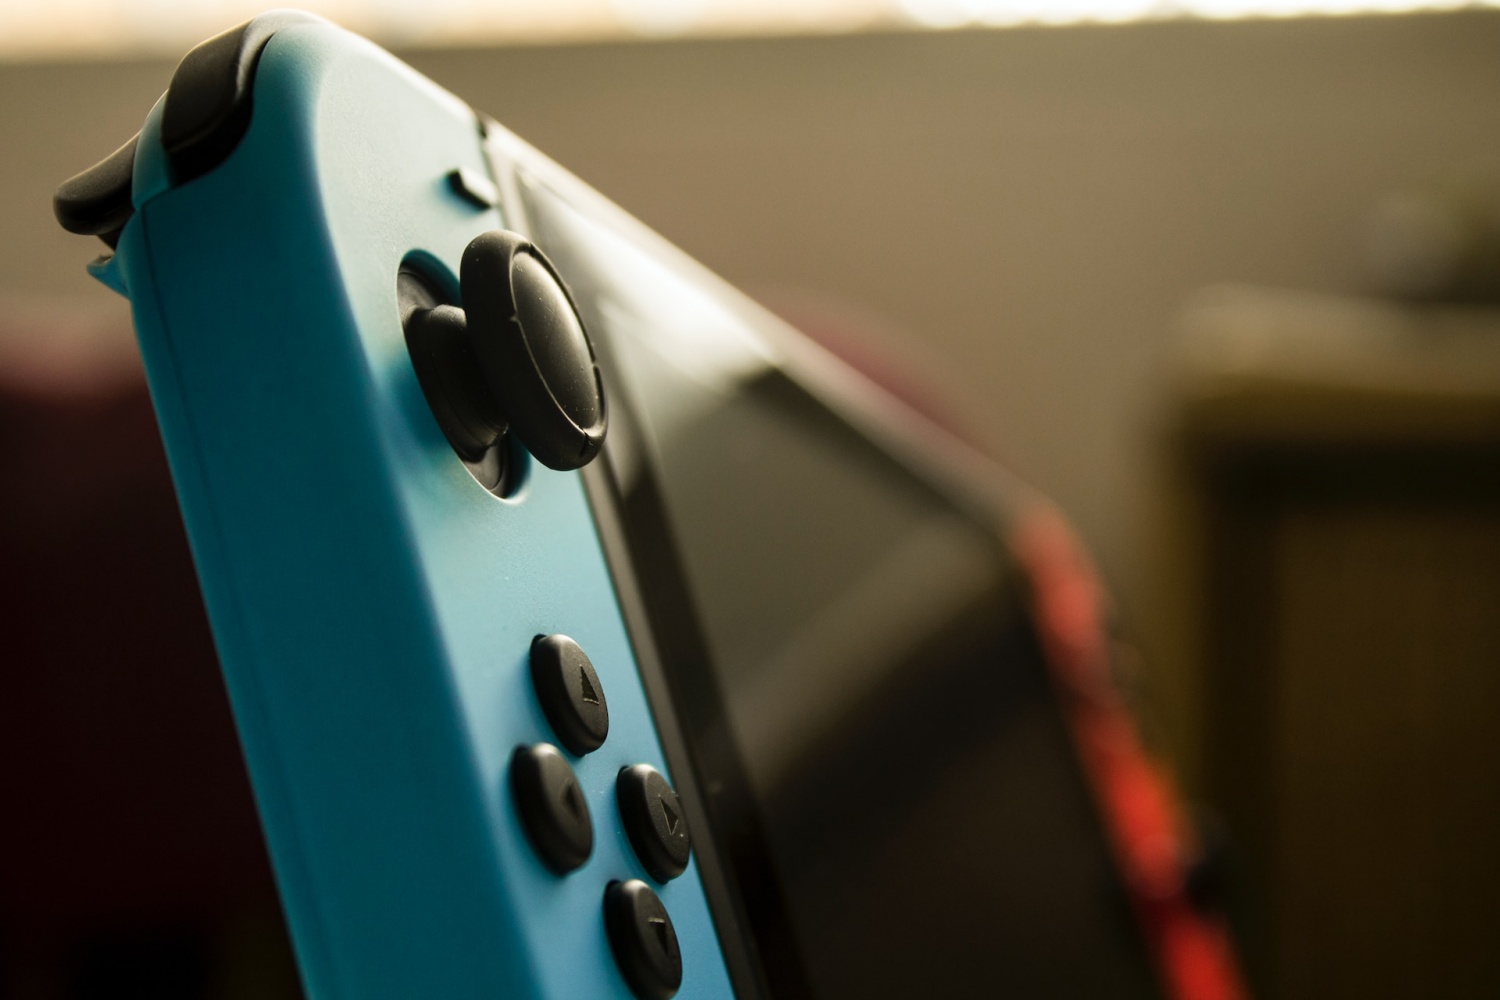 Nintendo Switch 2 price reveal leads latest round of diverting NG Switch  rumors -  News